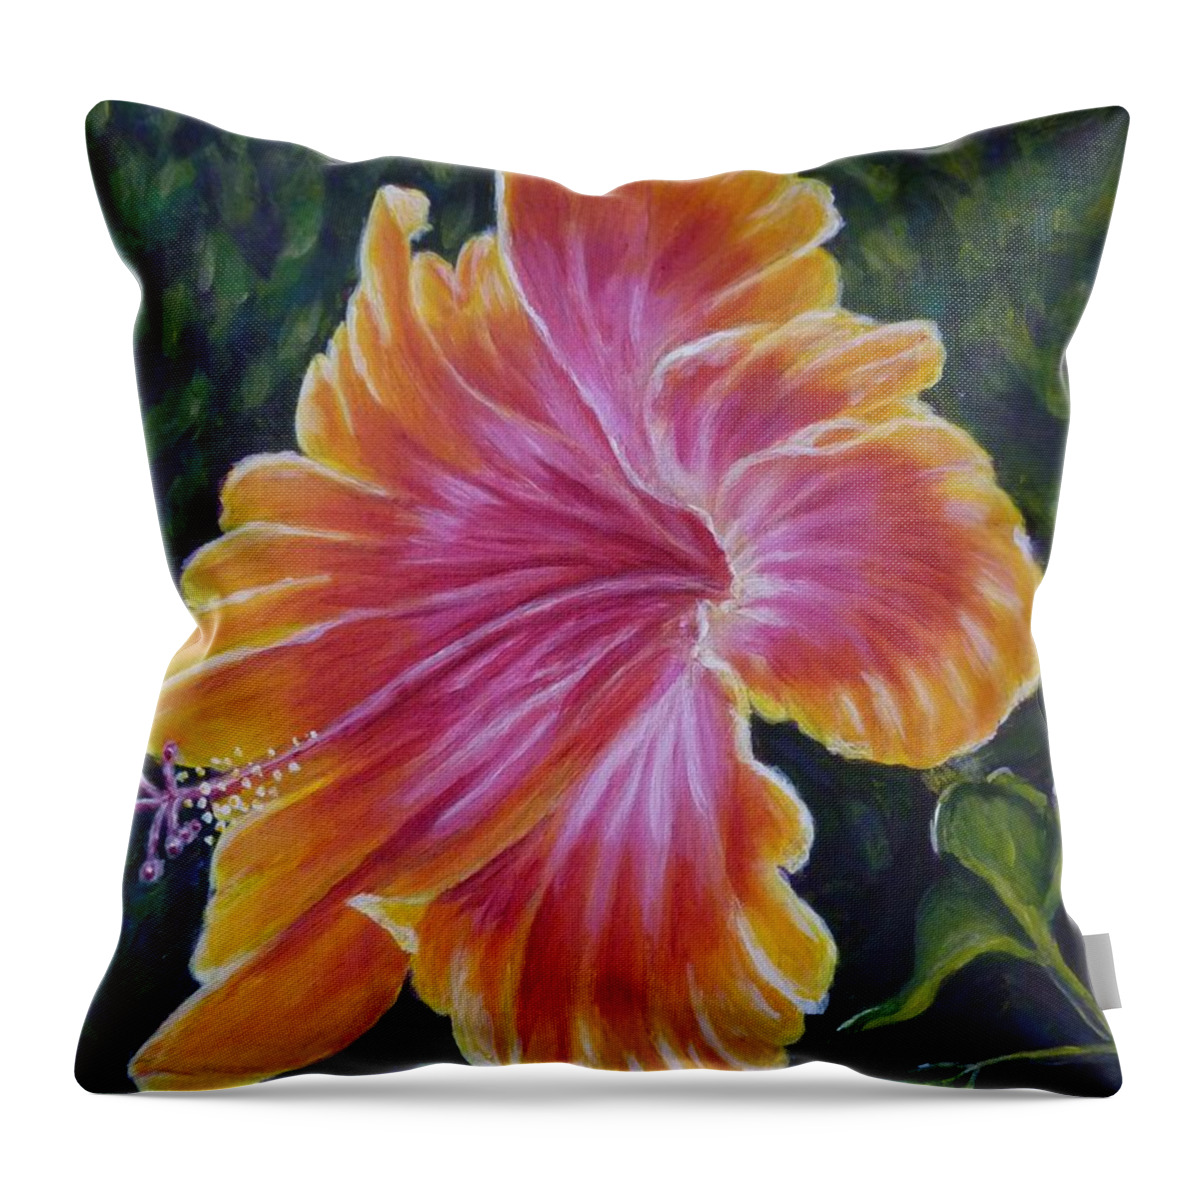 Hybiscus Throw Pillow featuring the painting Hibiscus by Amelie Simmons